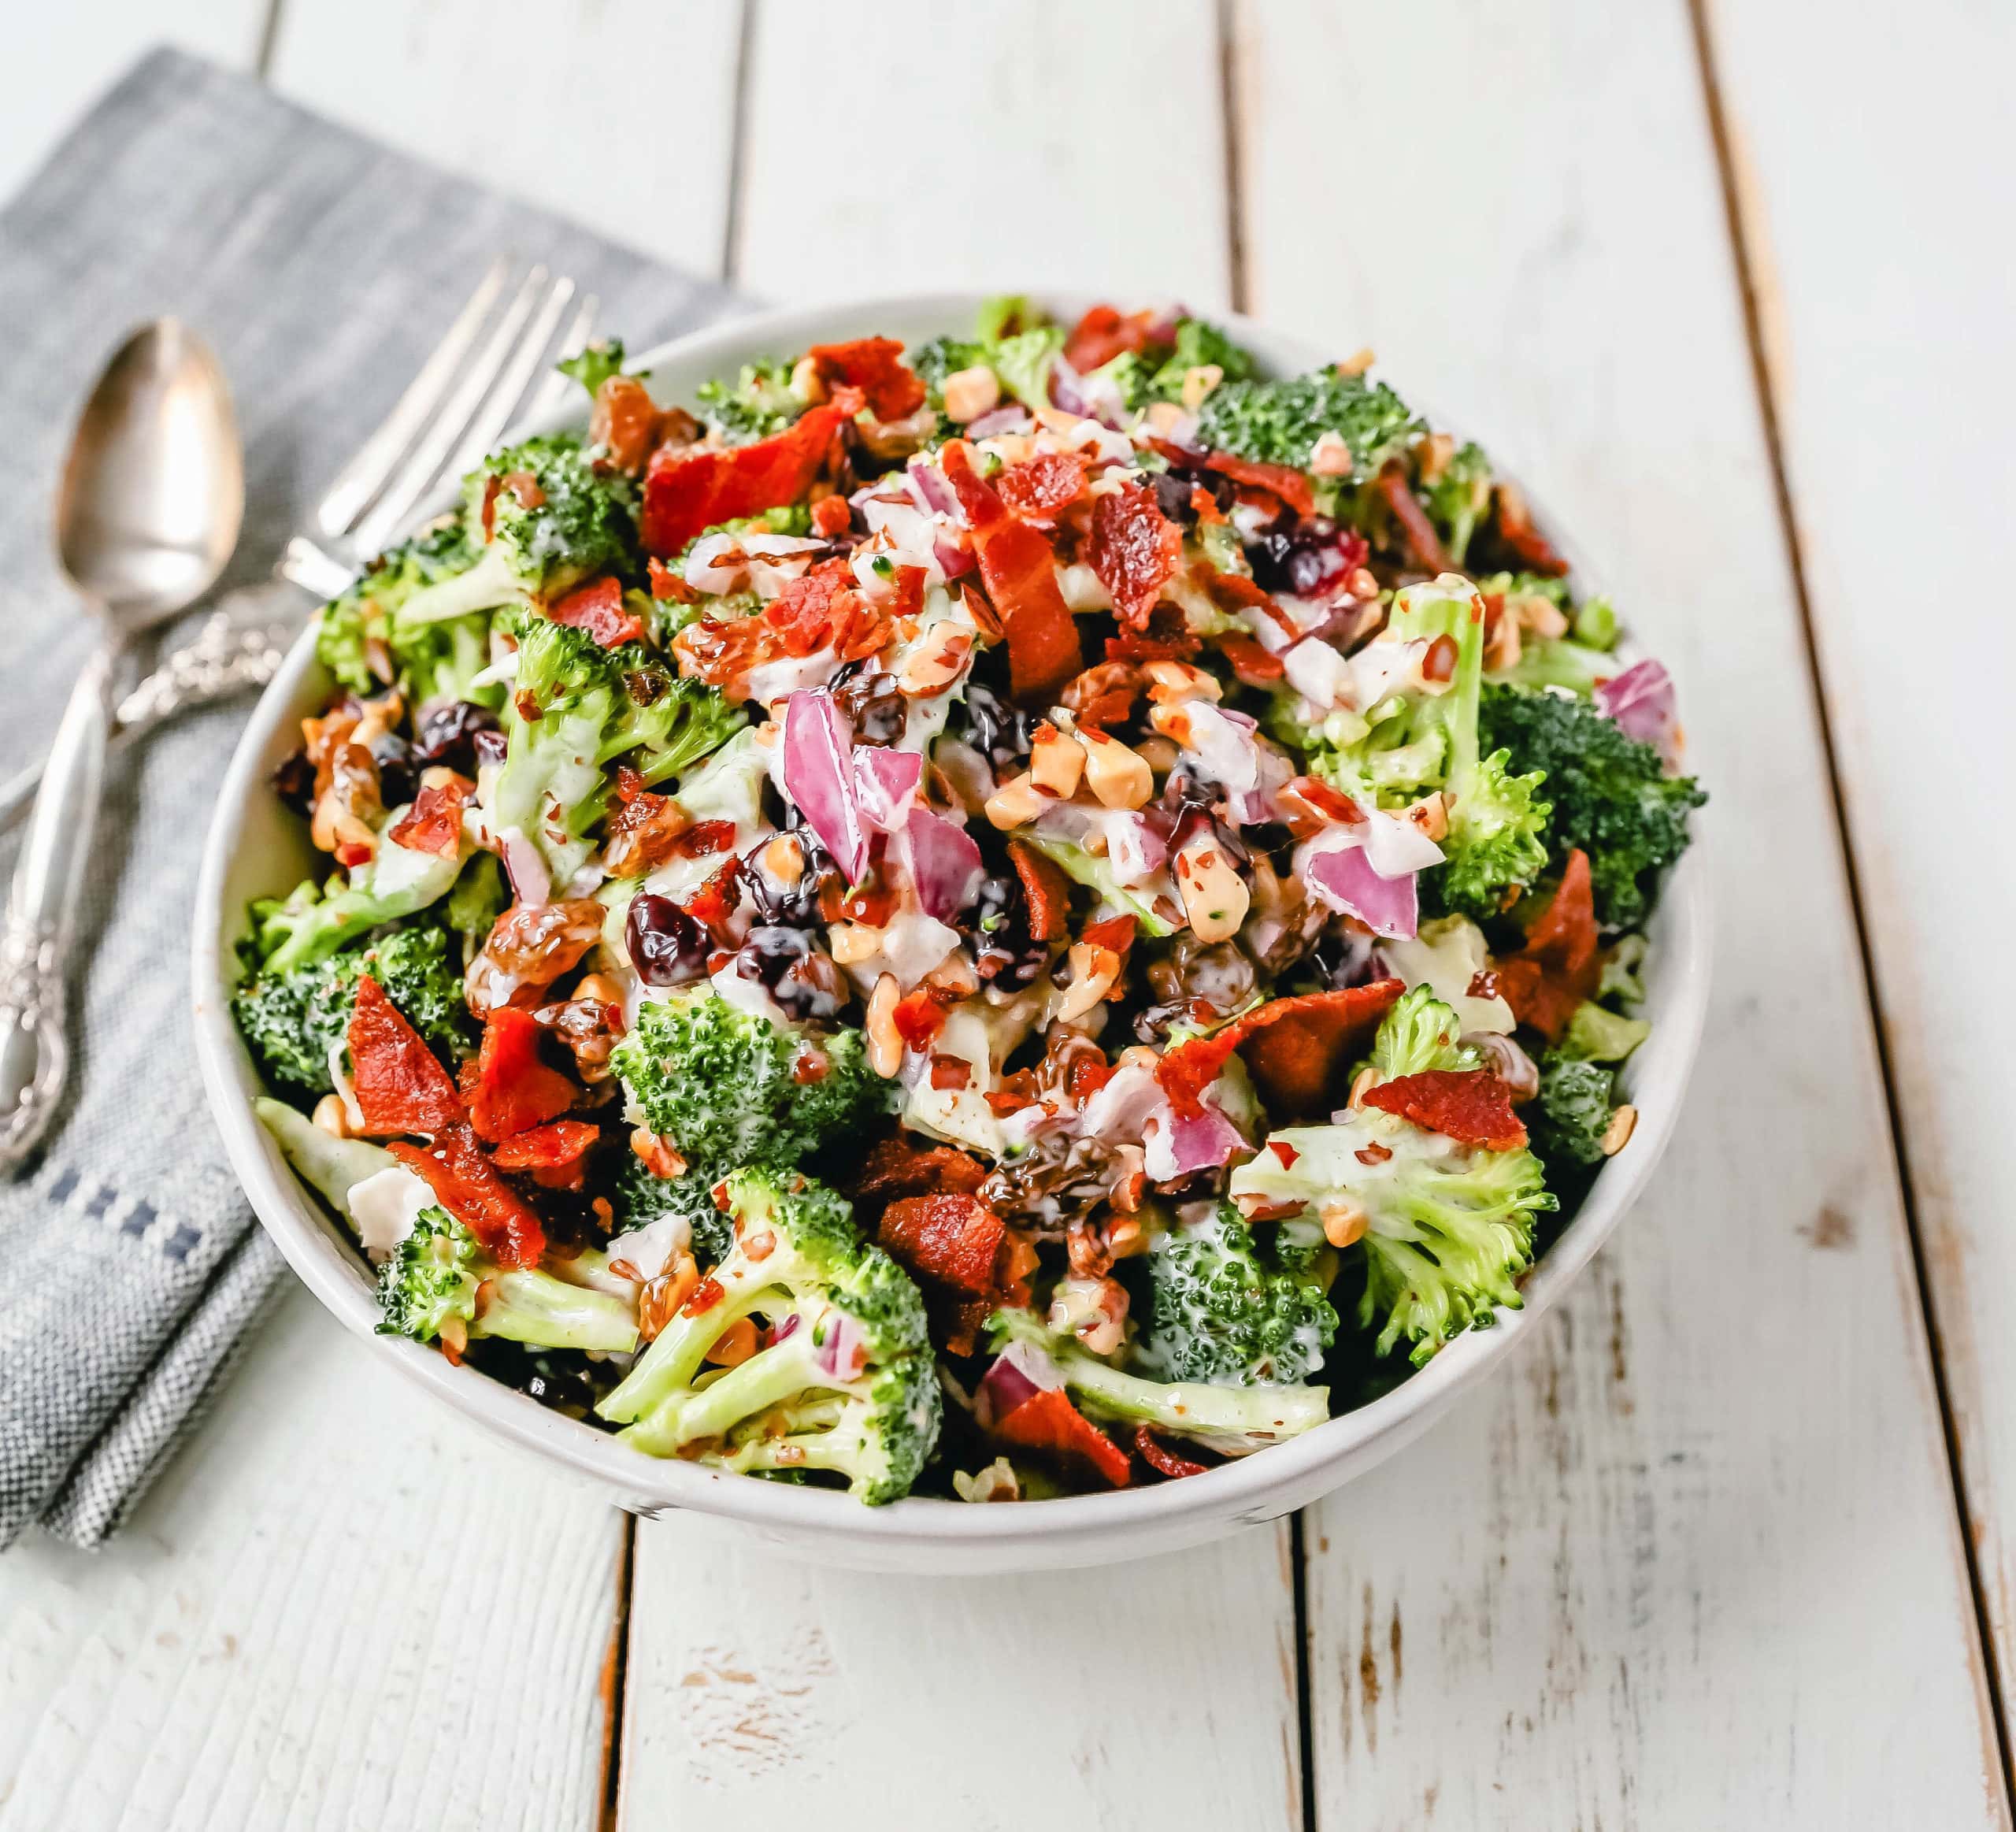 Broccoli Salad. Crunchy broccoli salad with crispy bacon, sweet dried cranberries, onion, nuts, tossed in a sweet and tangy dressing. A classic potluck side dish recipe! www.modernhoney.com #broccolisalad #sidedish #potluck #sides